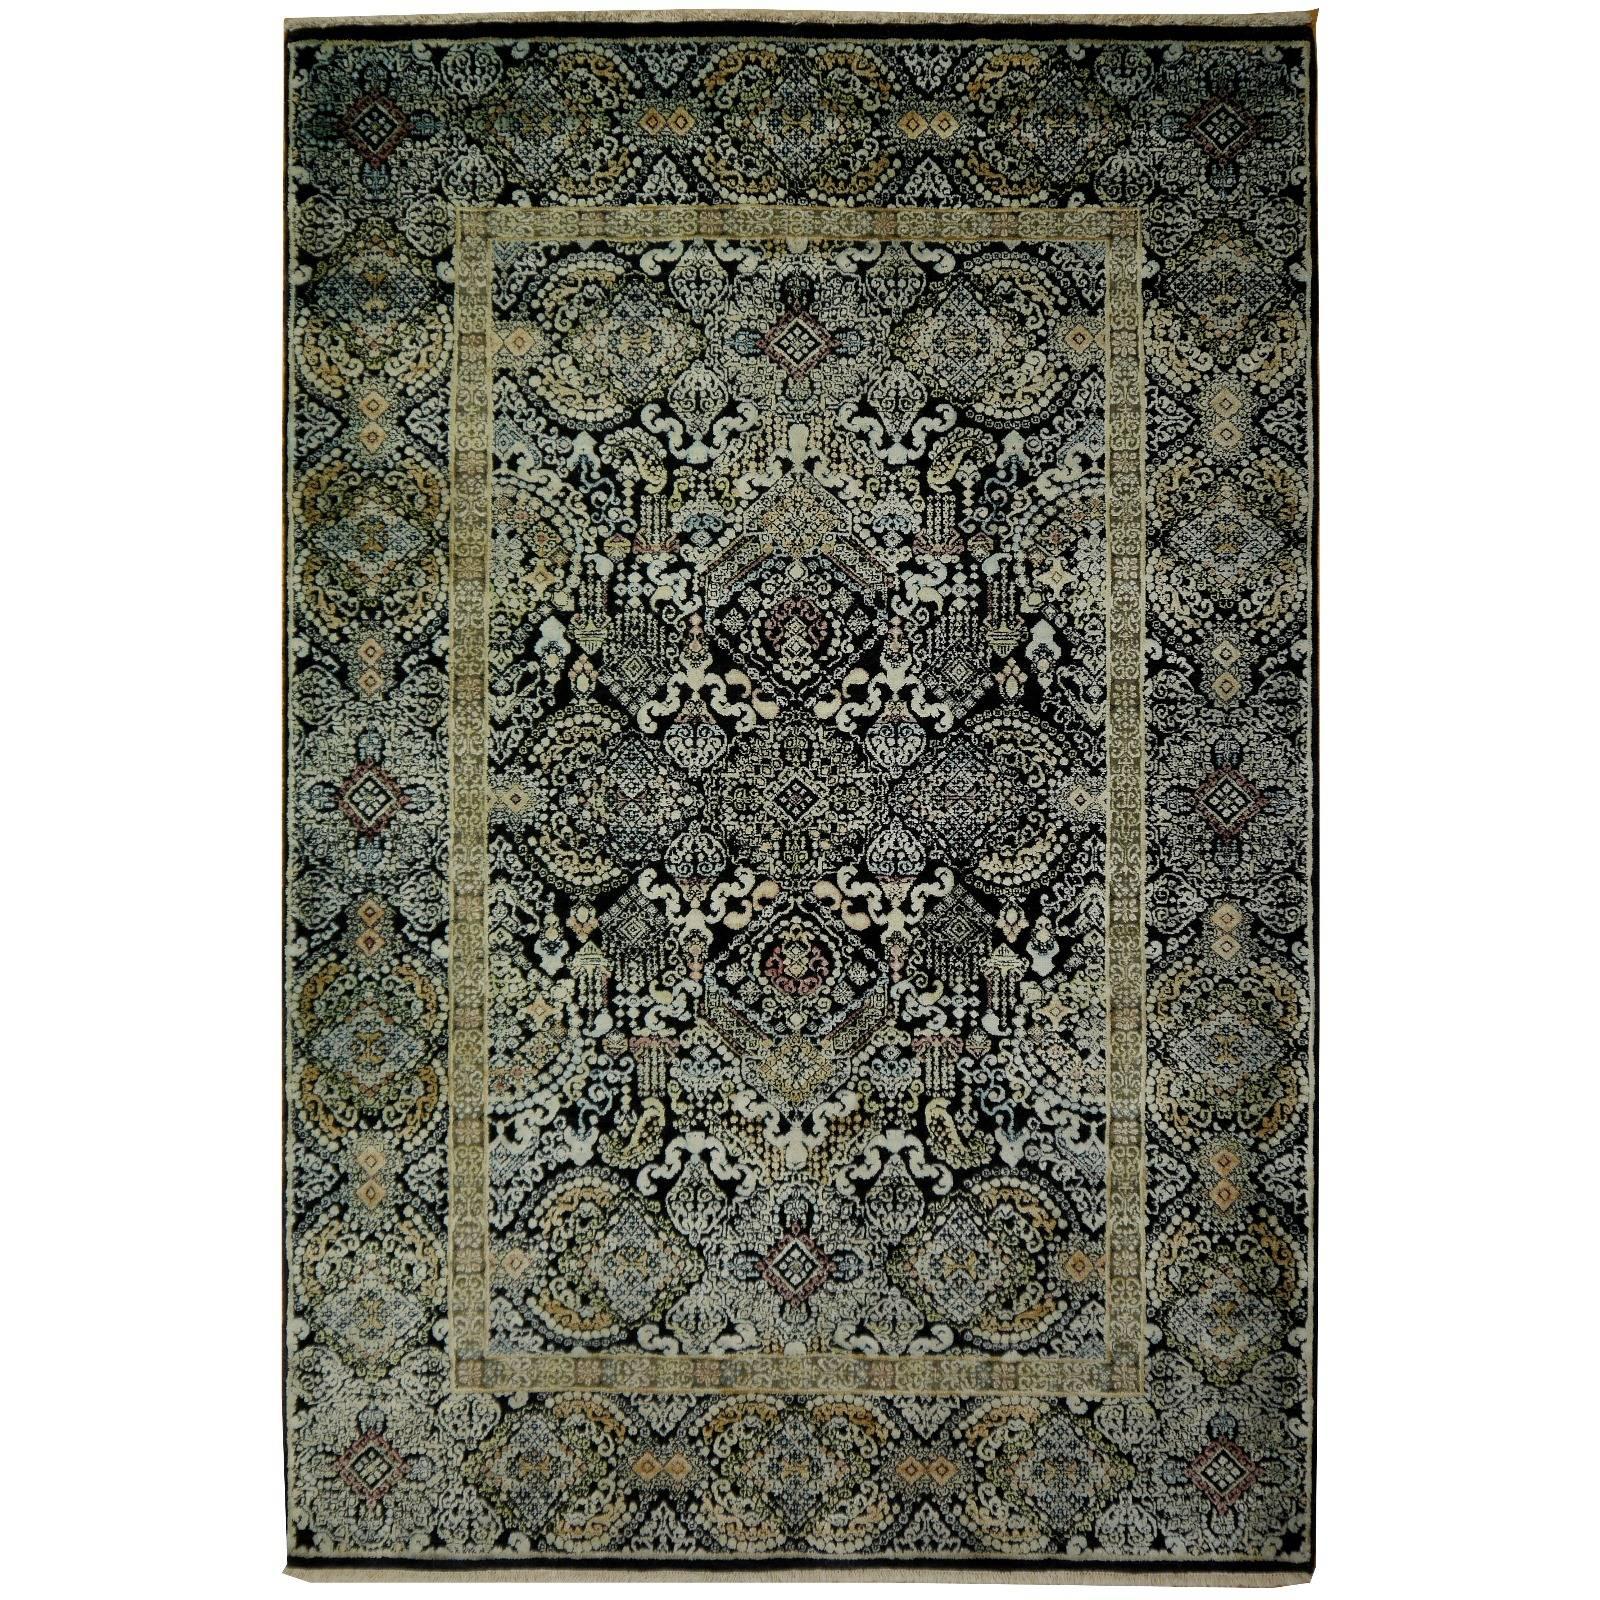 Kohinoor Hand-Knotted Wool and Silk Rug from India Black Gold Green 